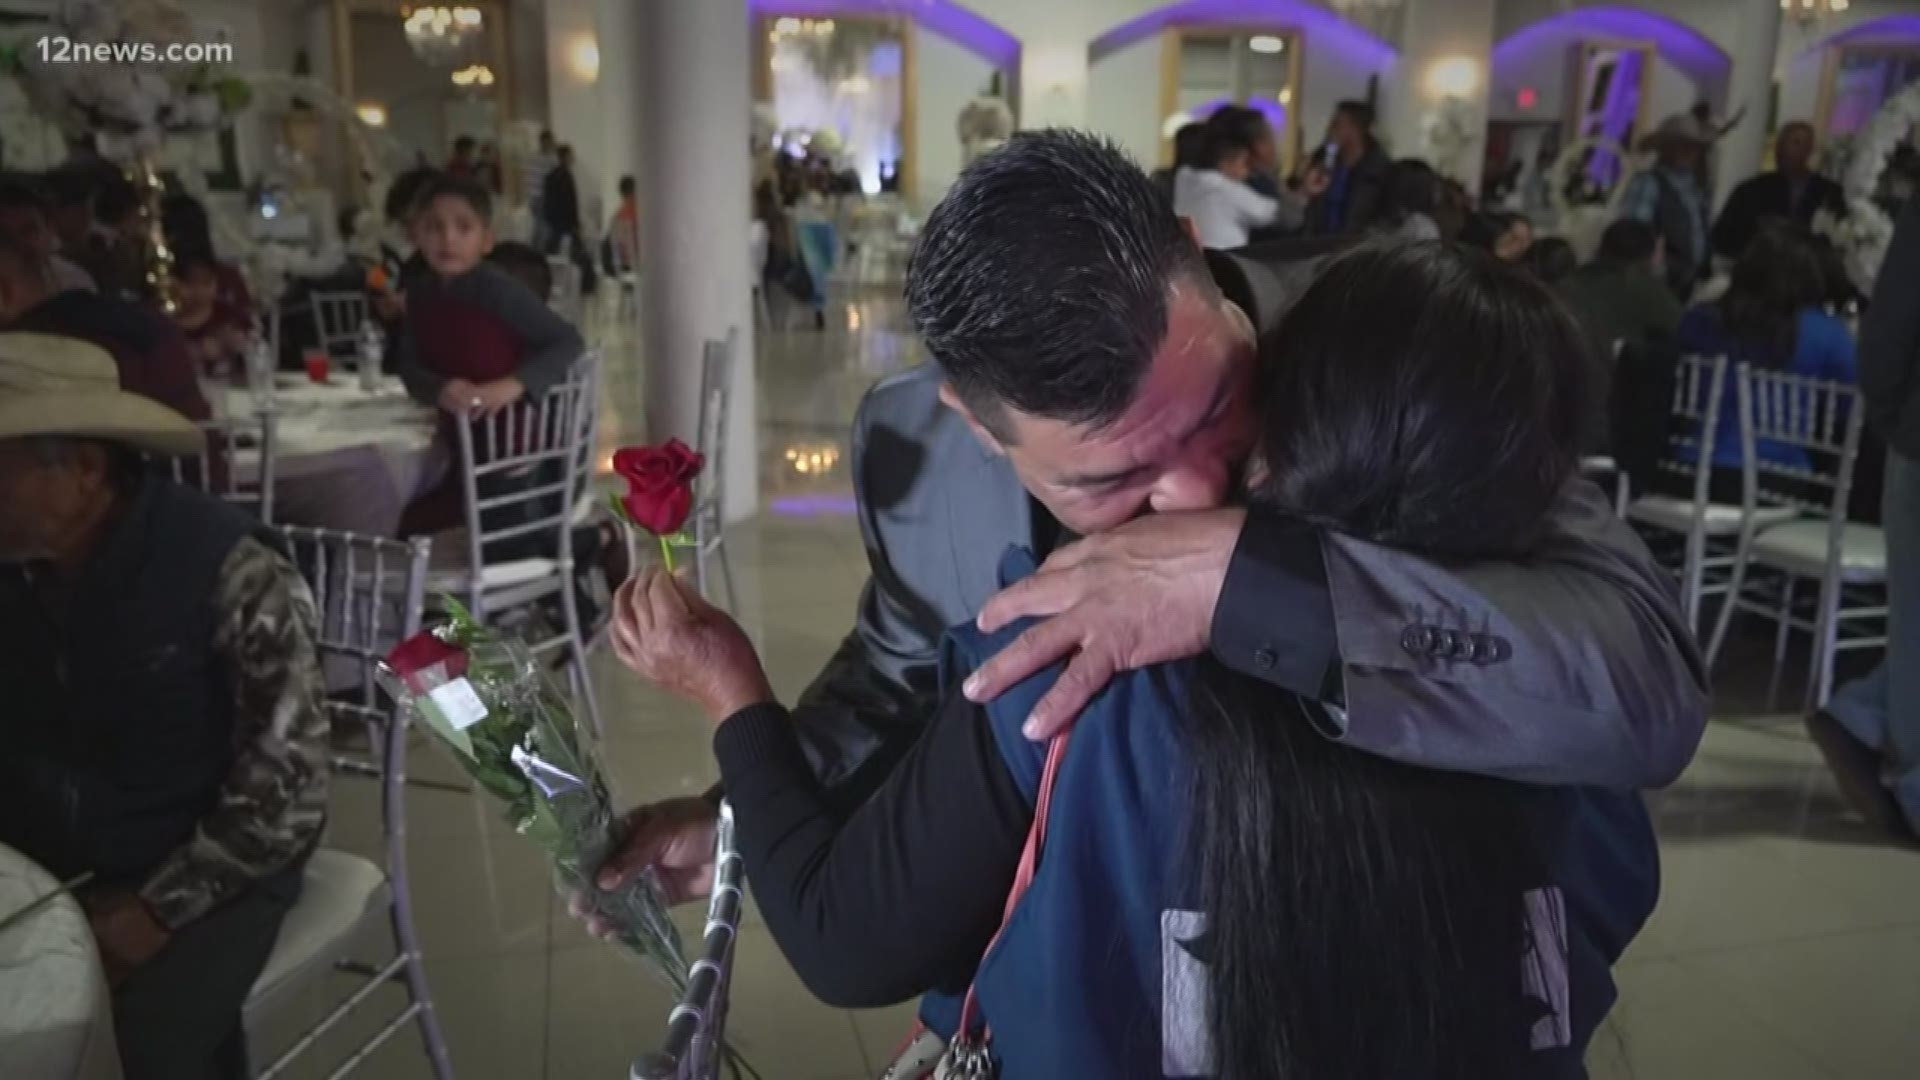 43 parents from Mexico received special visas to visit their children living here in Arizona. The visas will allow these emotional reunions to extend for 10 years.